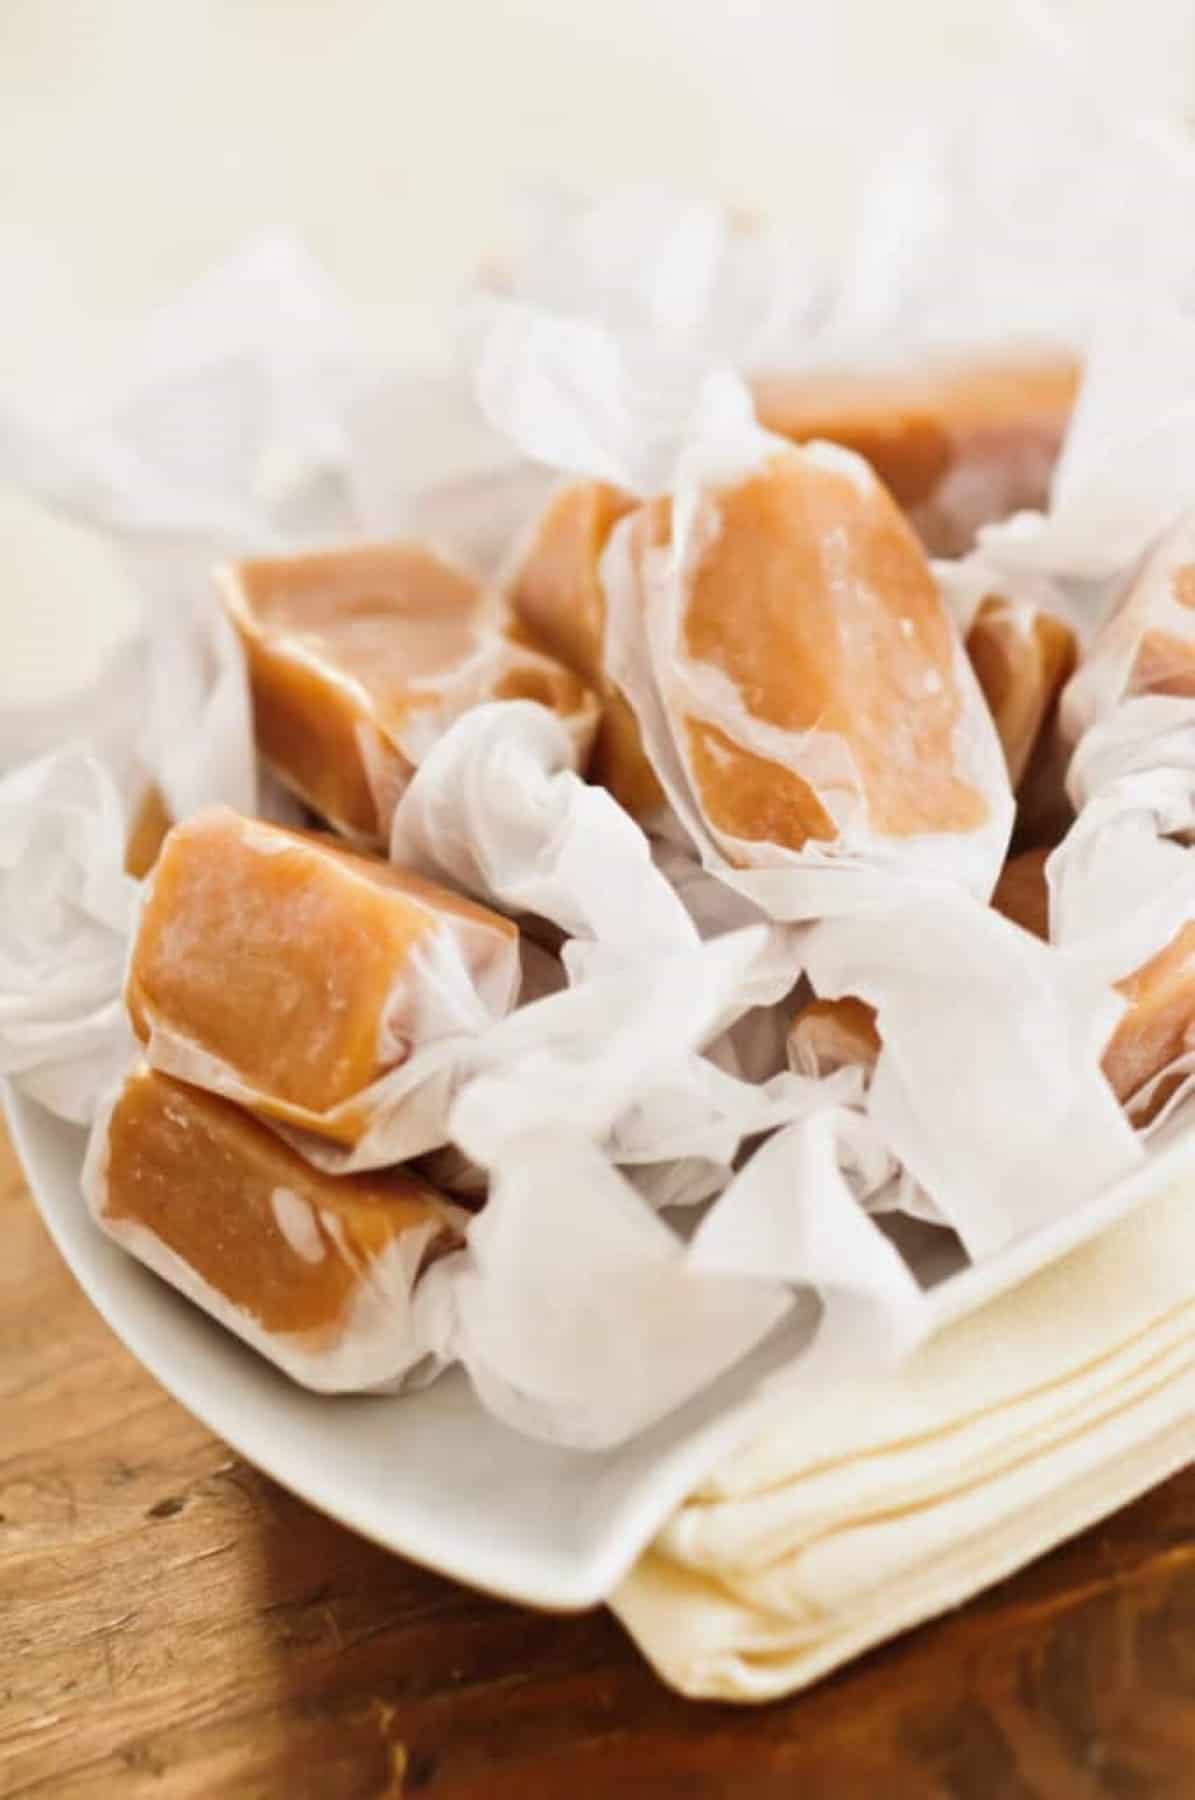 Homemade Christmas Caramel wrapped in wax paper in a white bowl on a wooden tabletop.